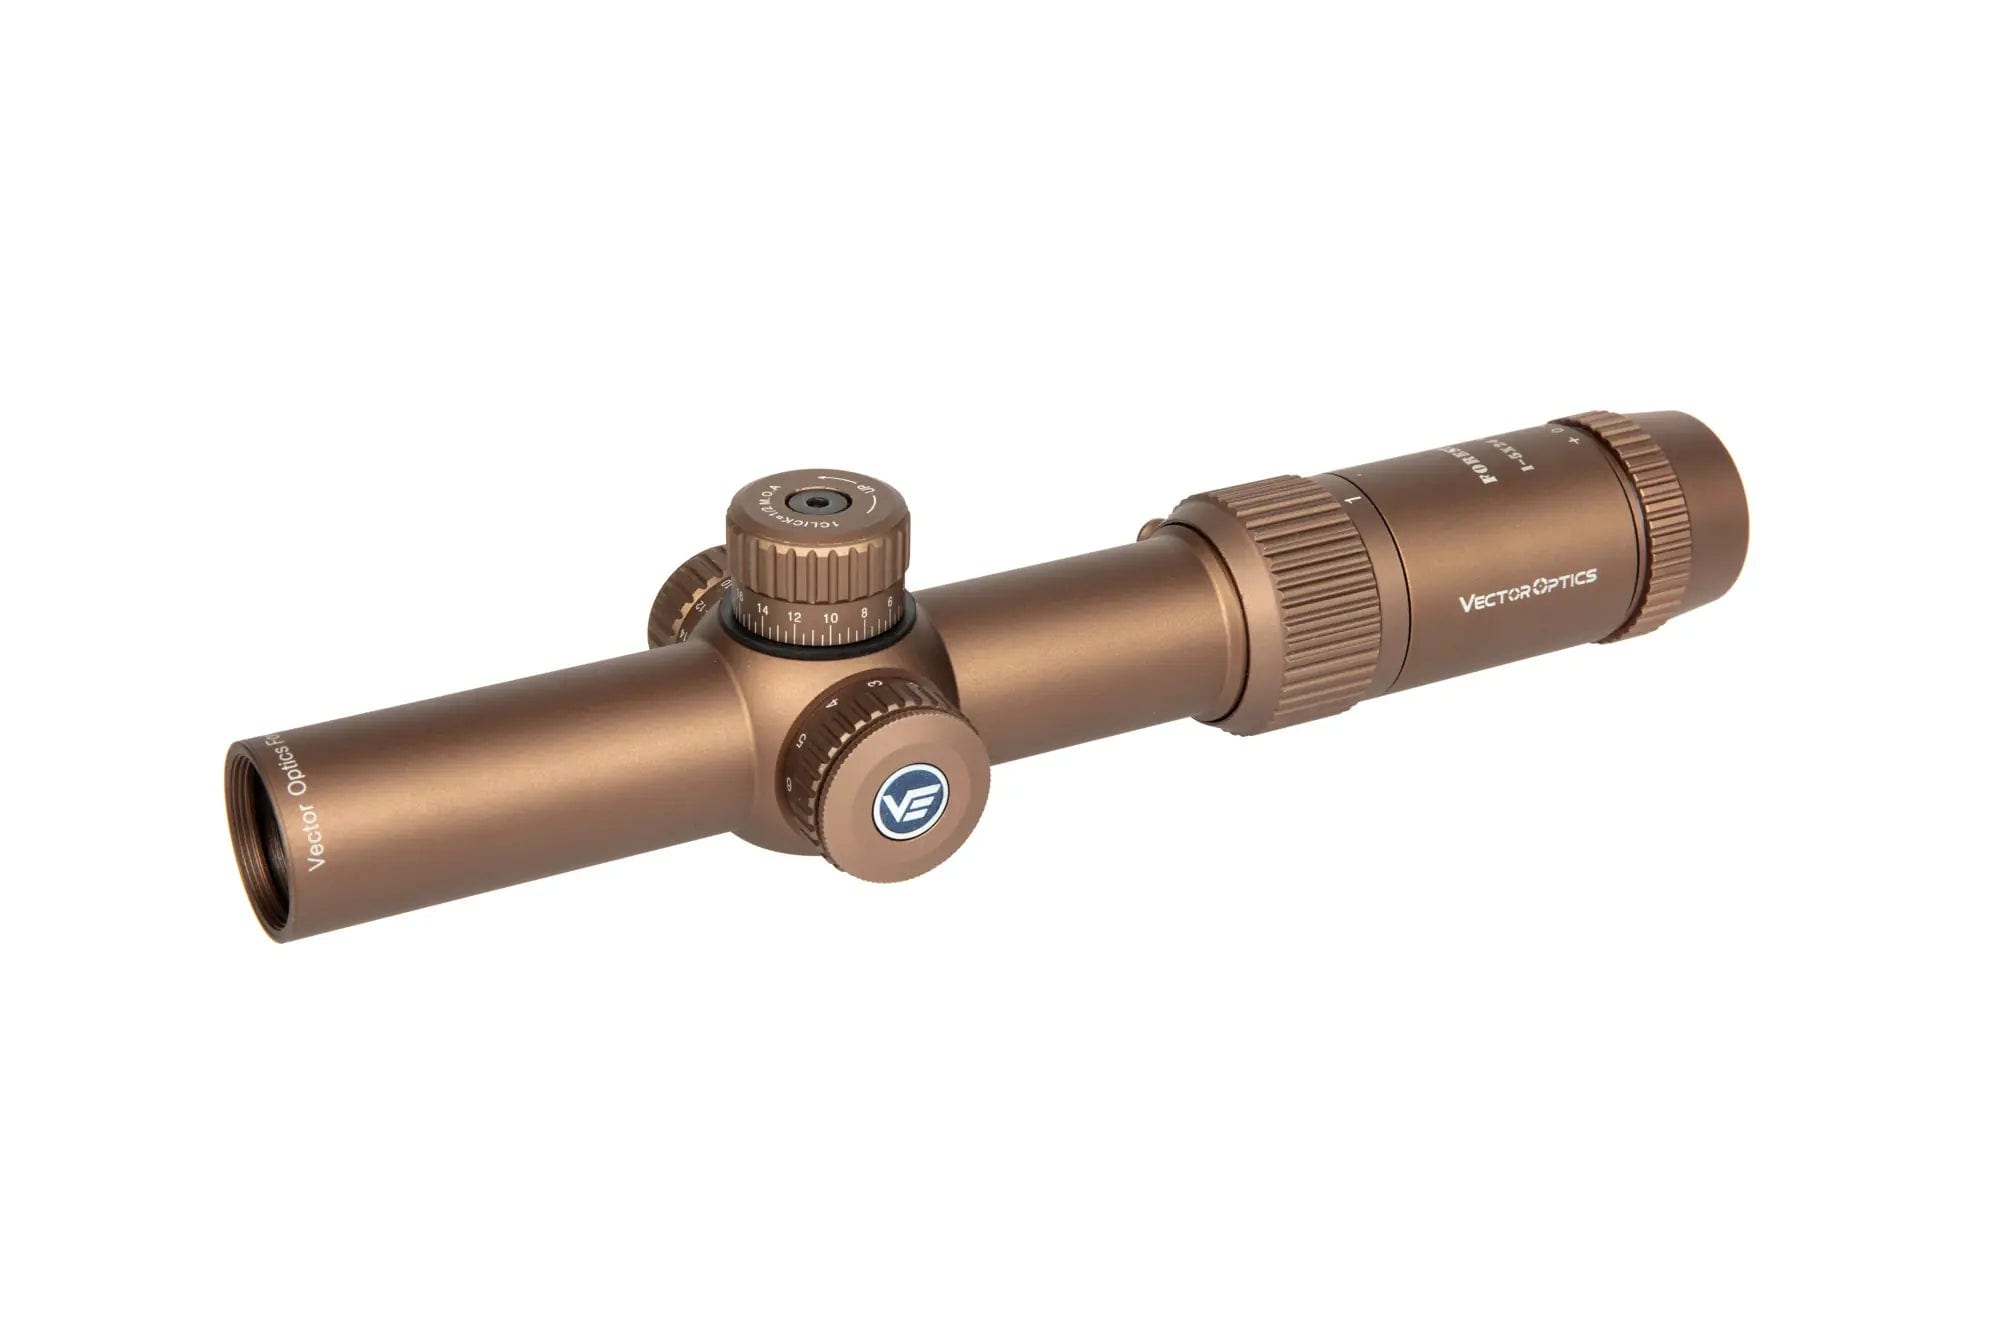 Forester 15x24 GenII scope Coyote FDE